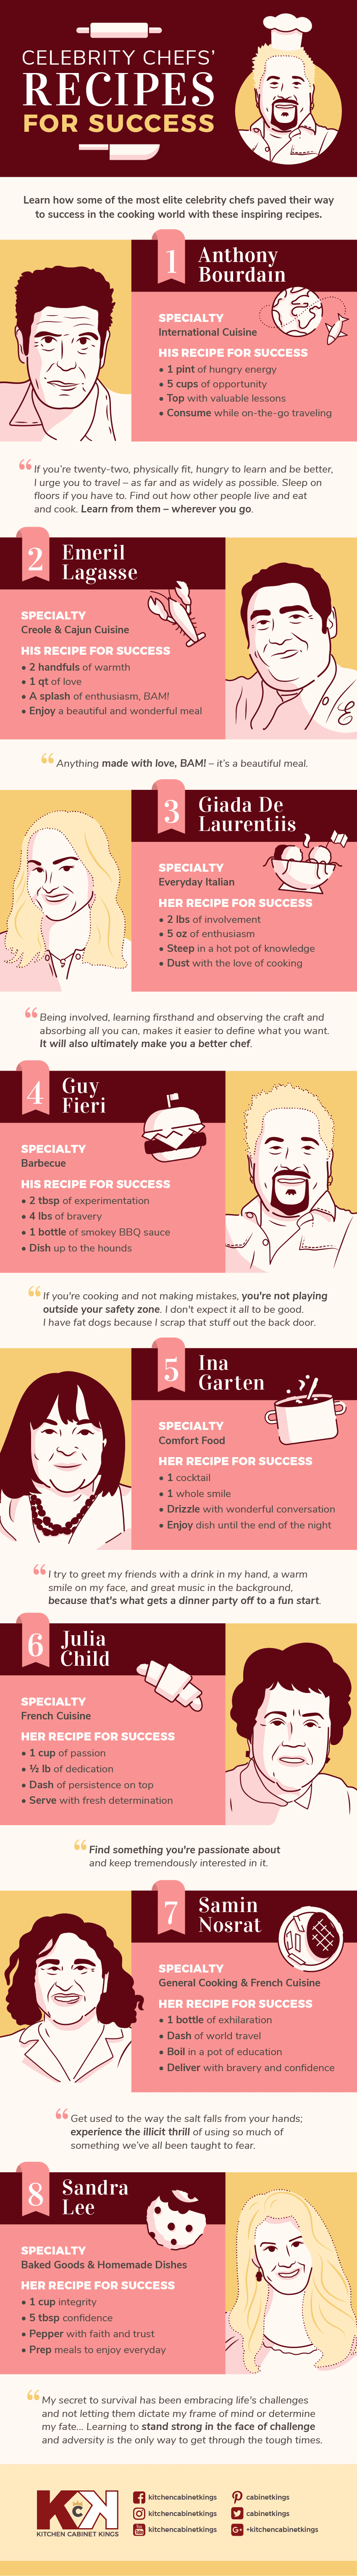 8 Celebrity Chef's Recipes for Success #infographic